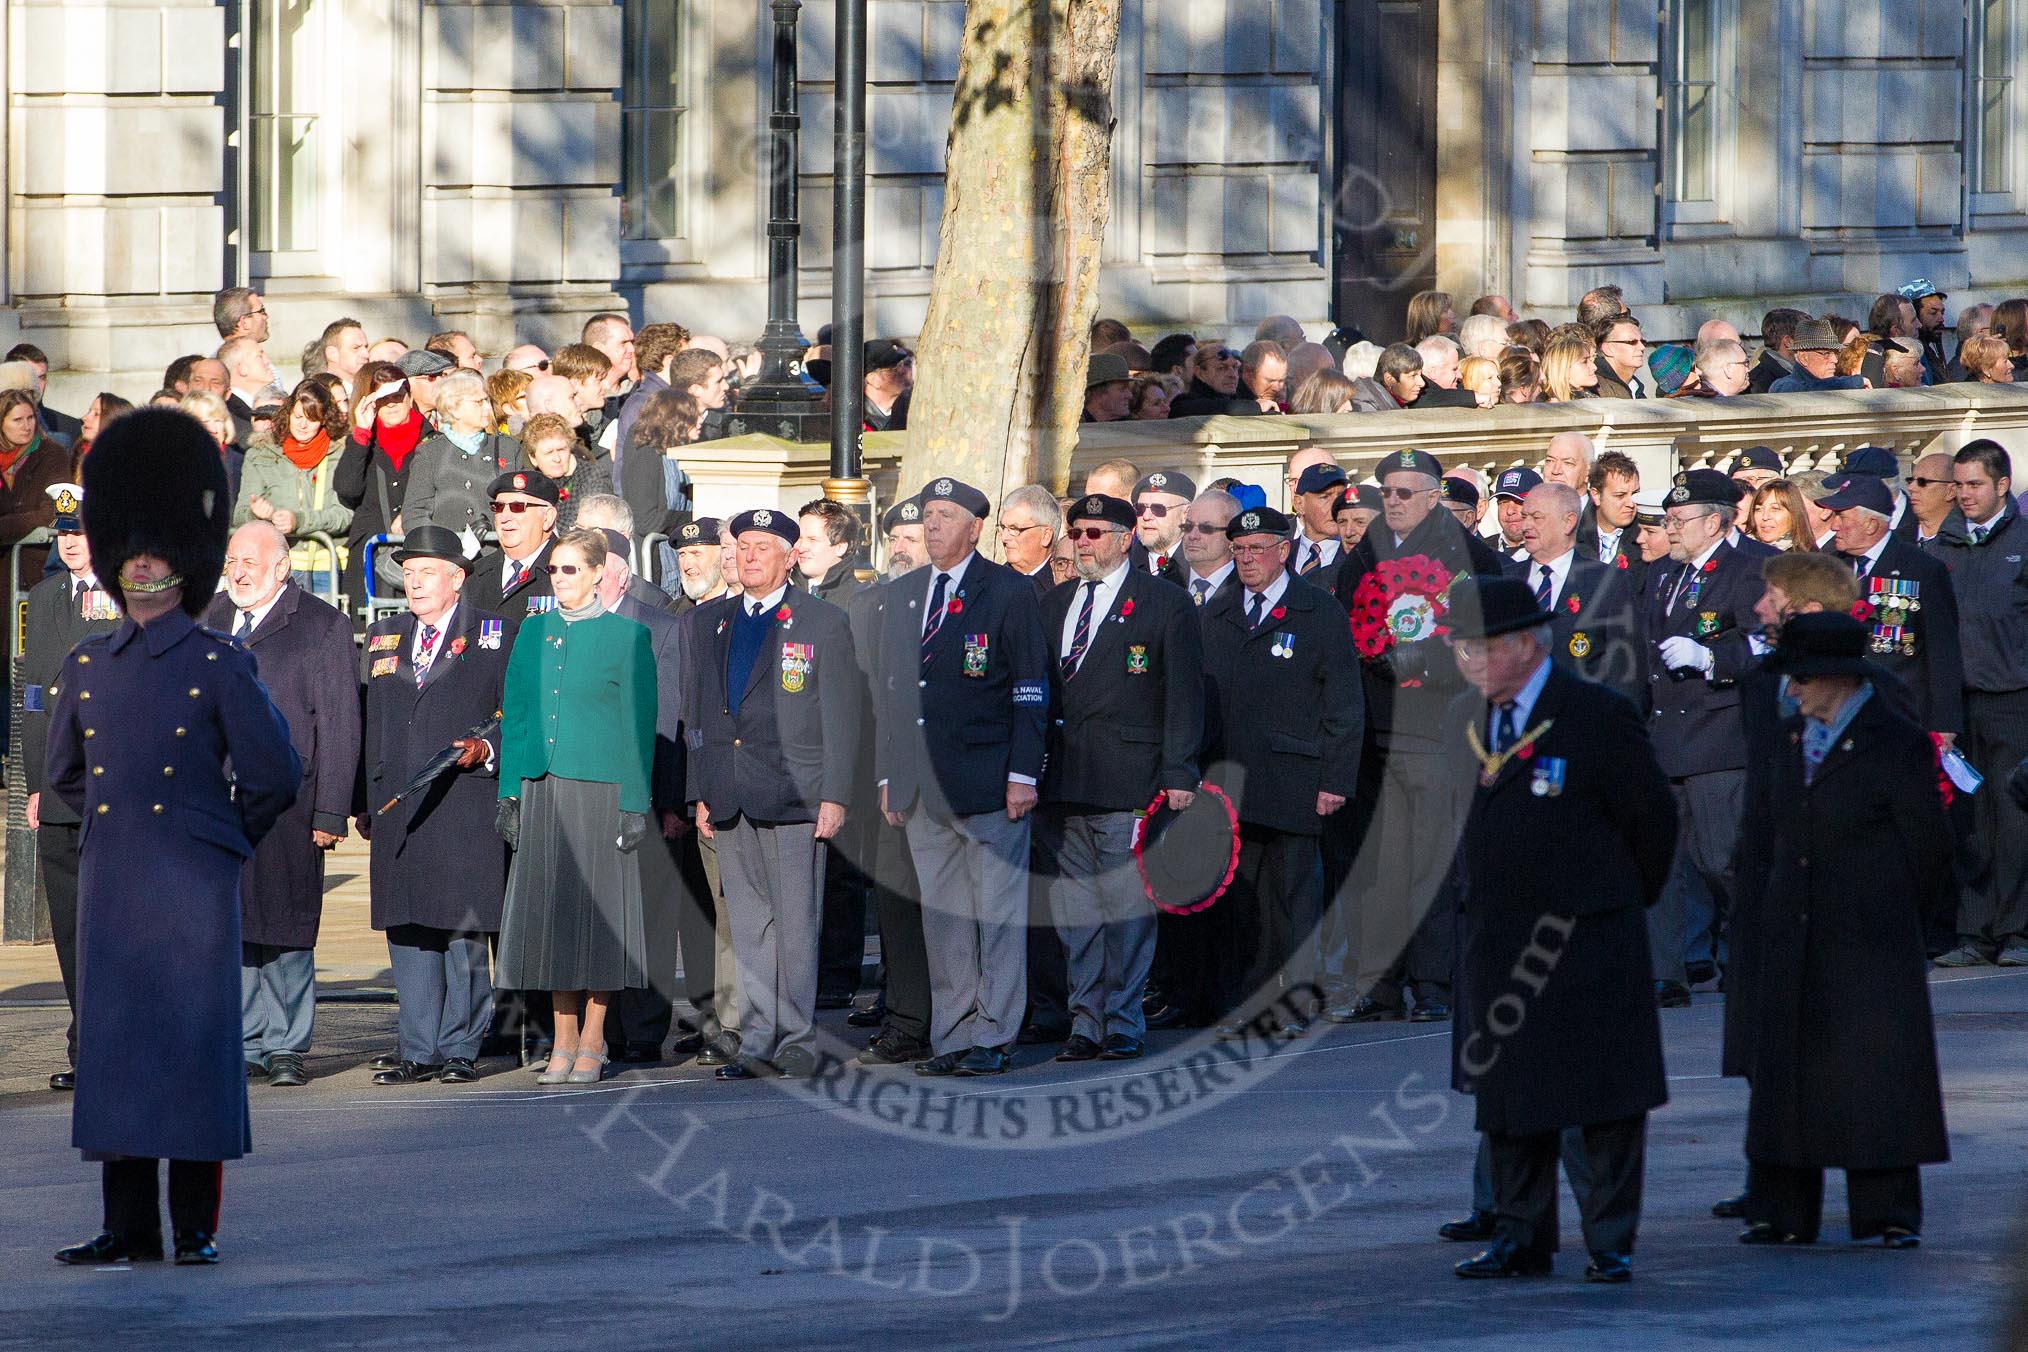 The column of ex-Servicemen and women in position at Whitehall. The head of the civilian column is at the right.